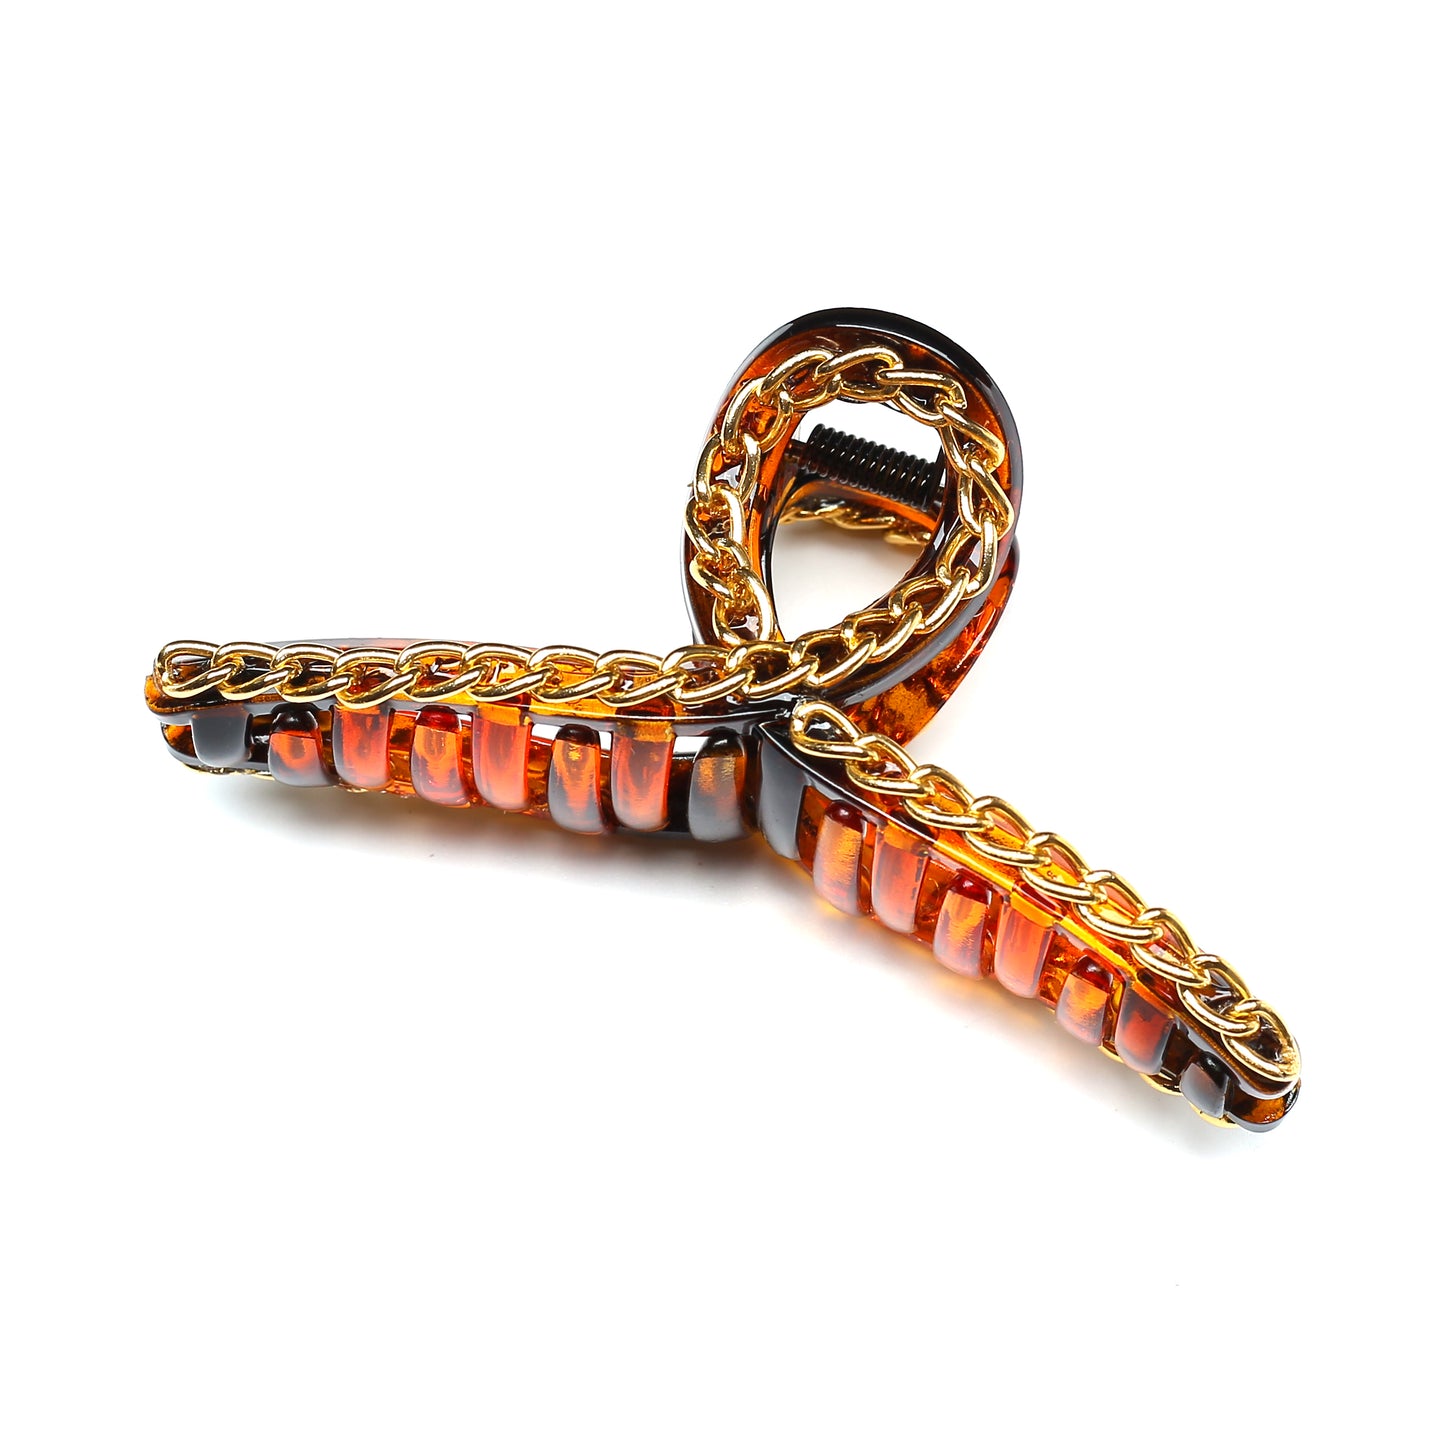 Large Chain Claw Clip 11cm